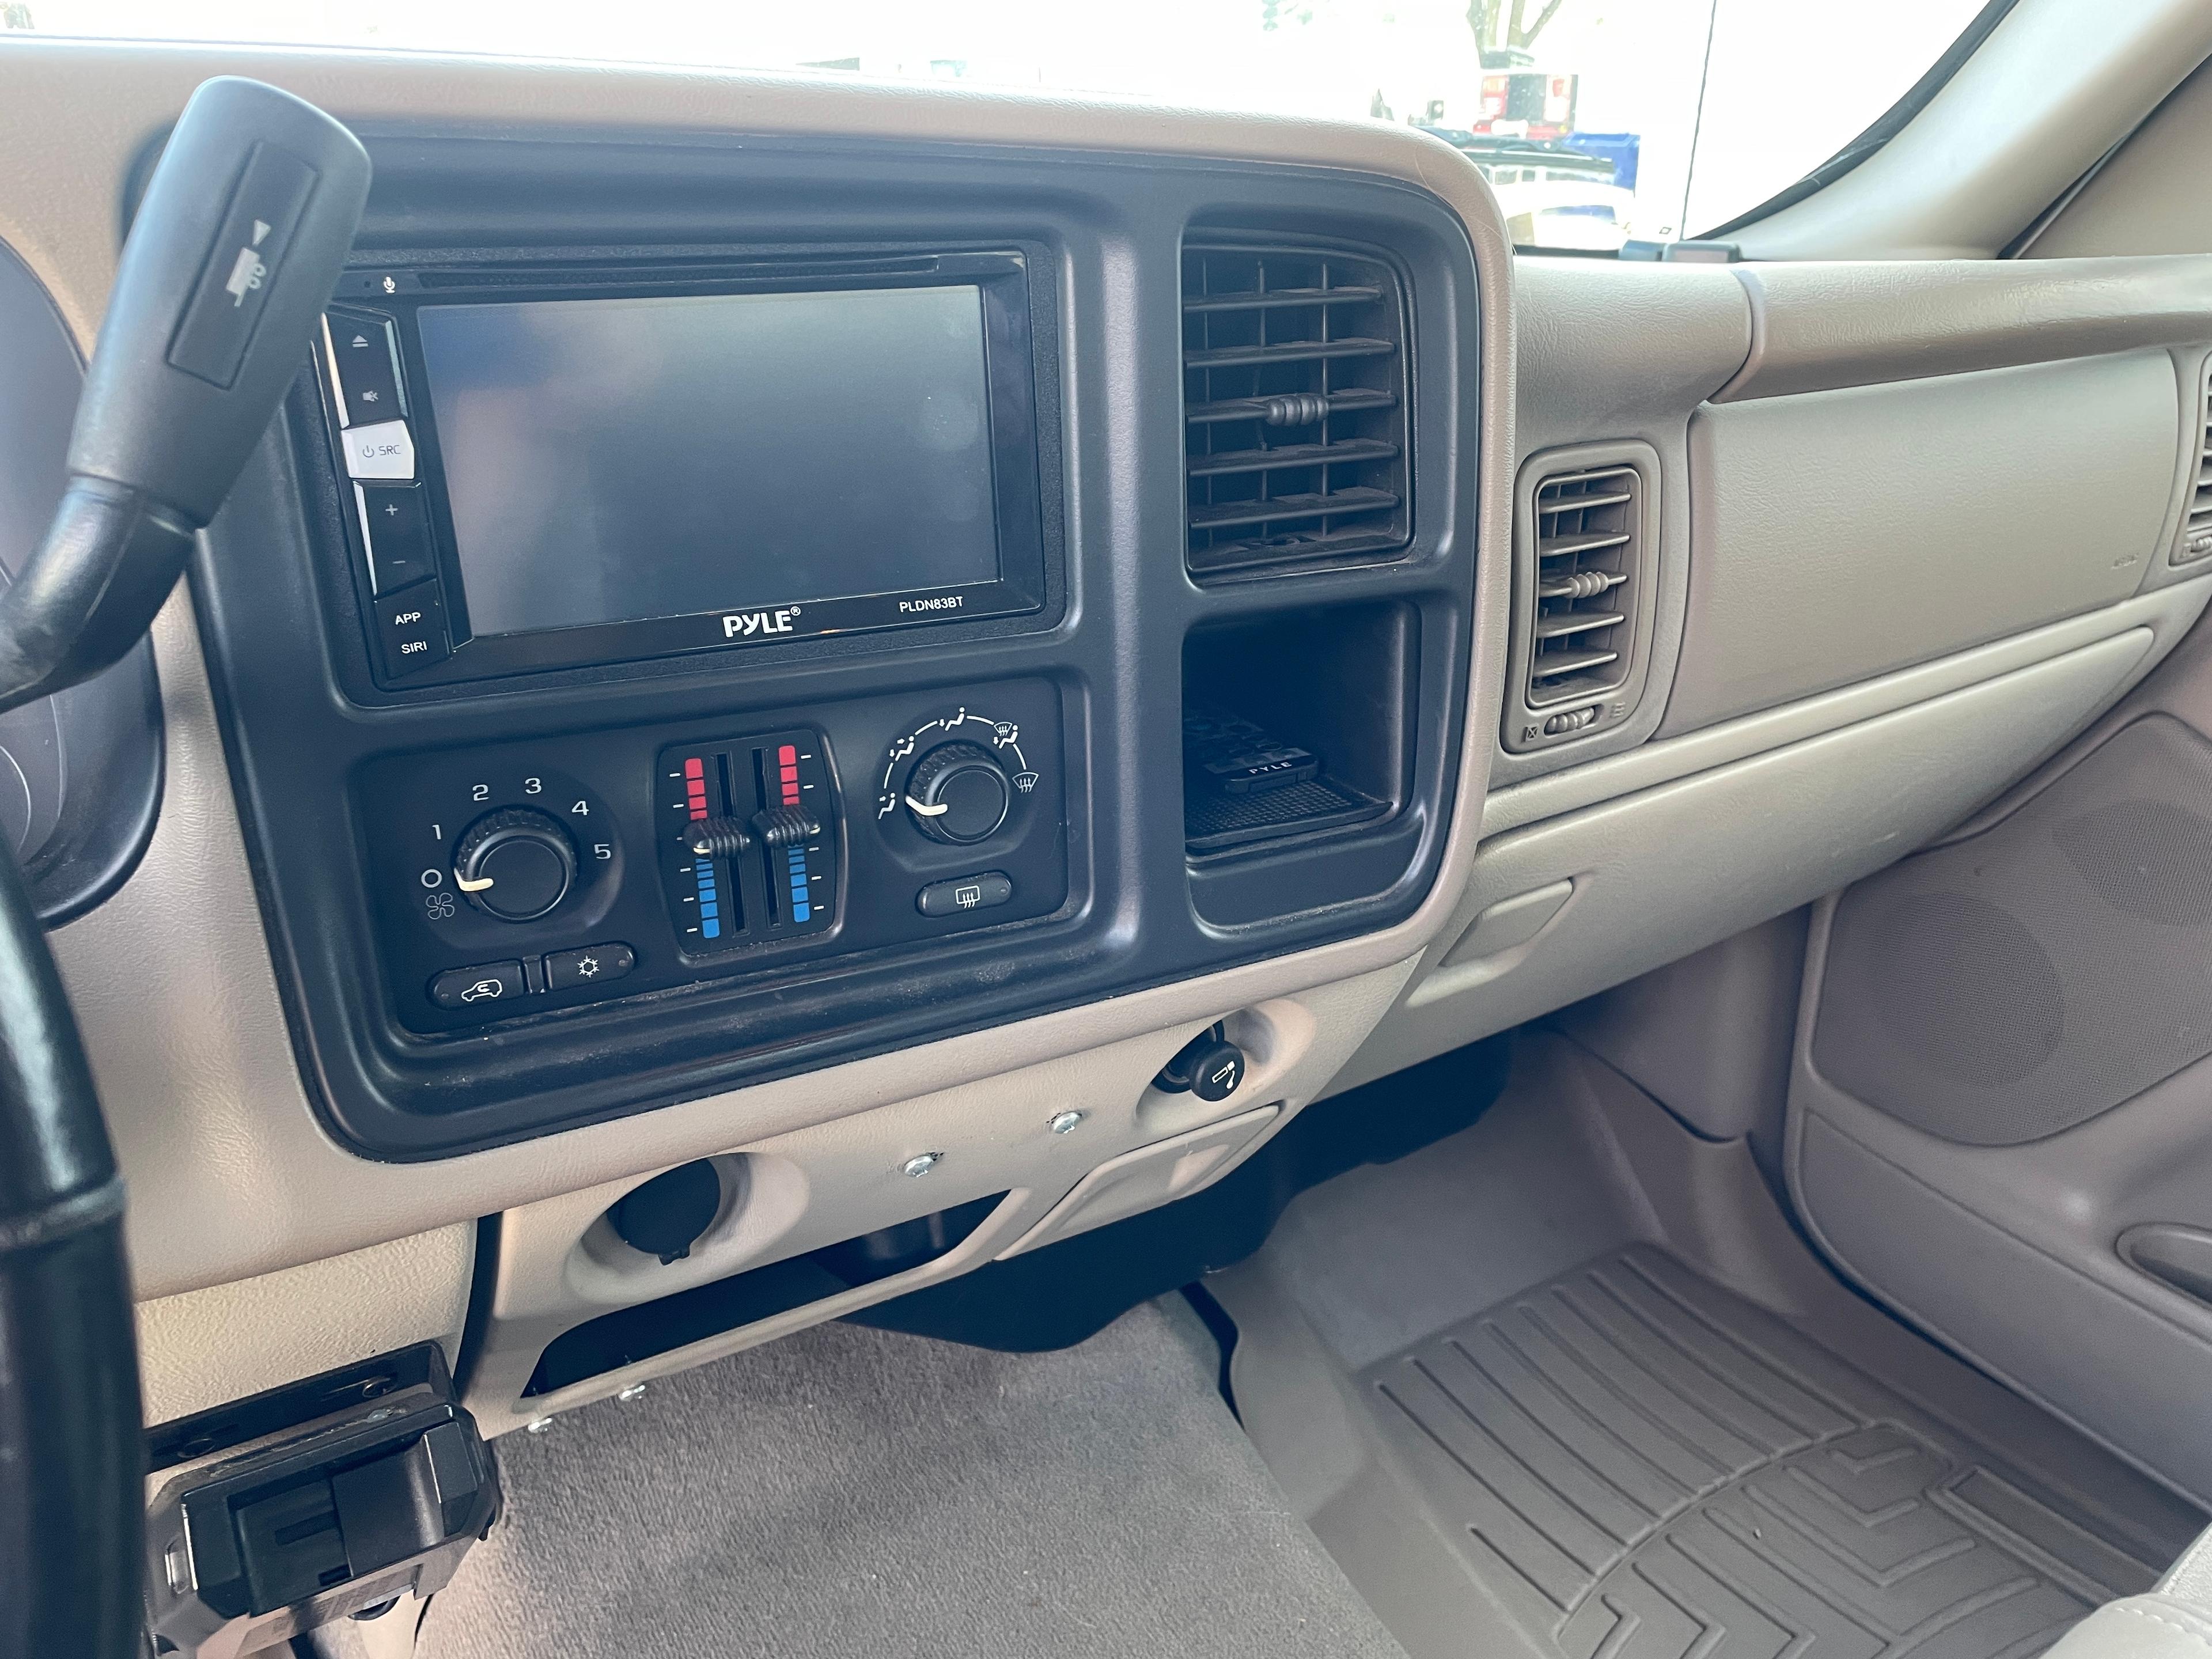 2006 Chevy Avalanche 2500 4X4 Pick Up Truck